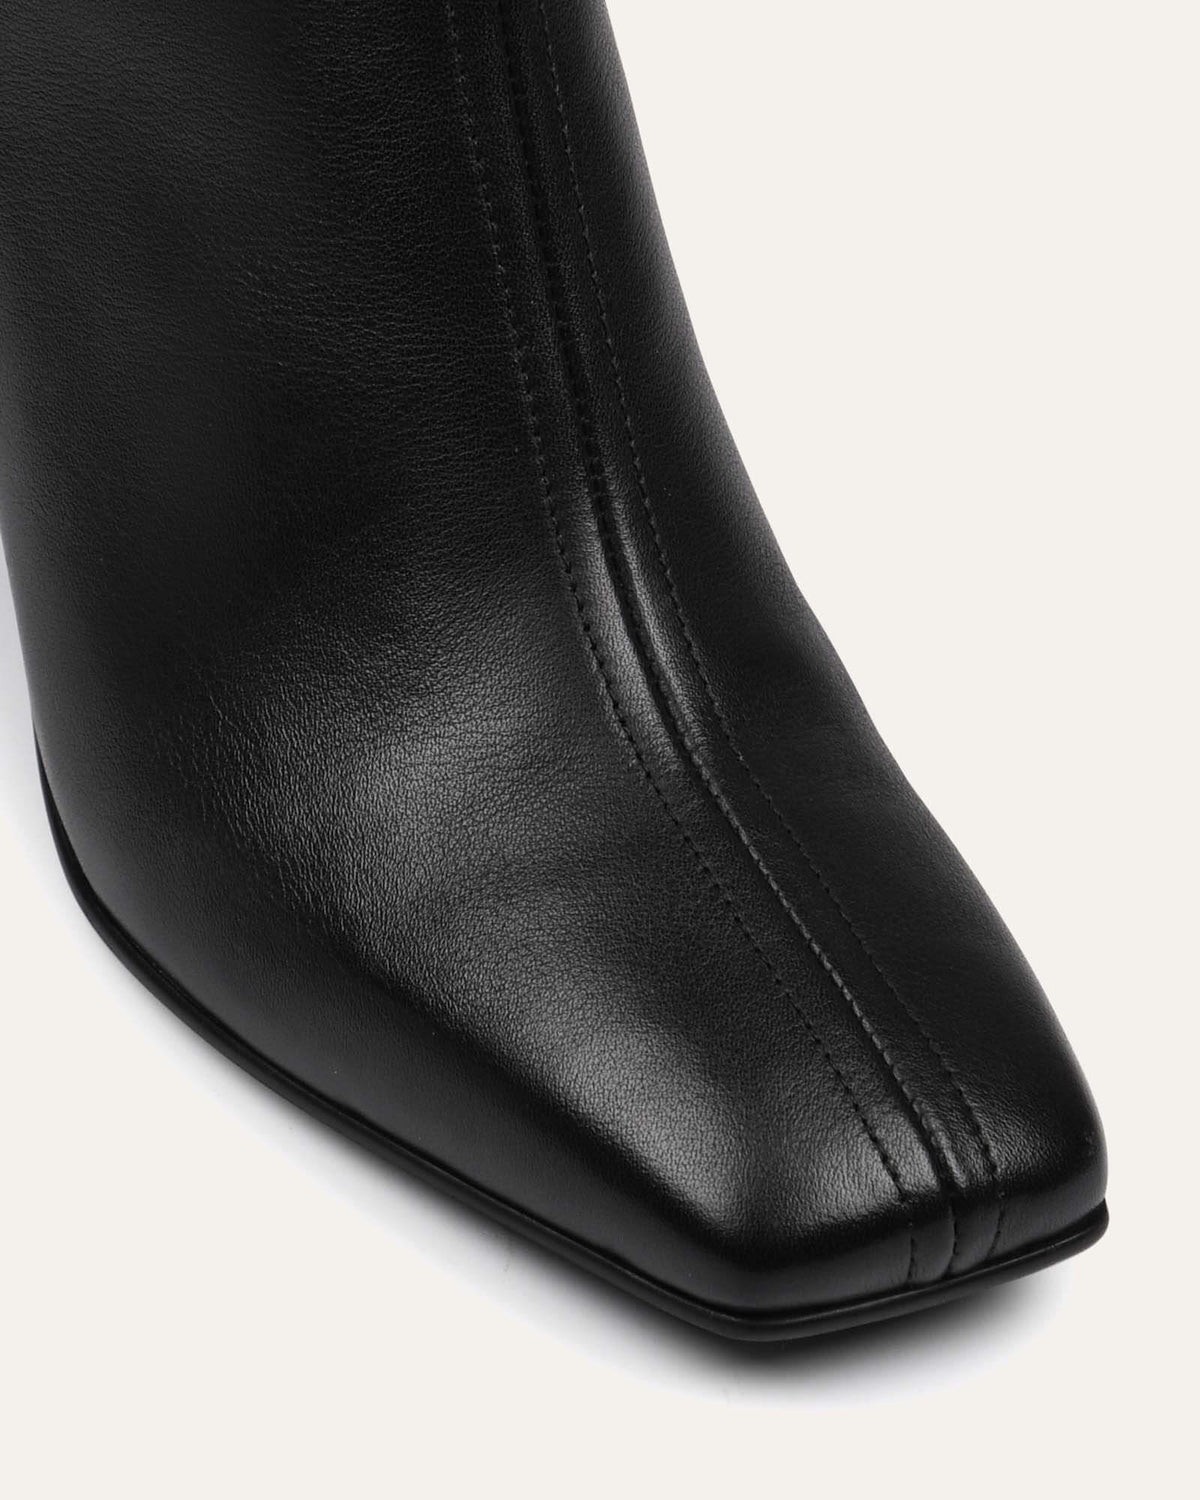 NEVADA MID ANKLE BOOTS BLACK LEATHER